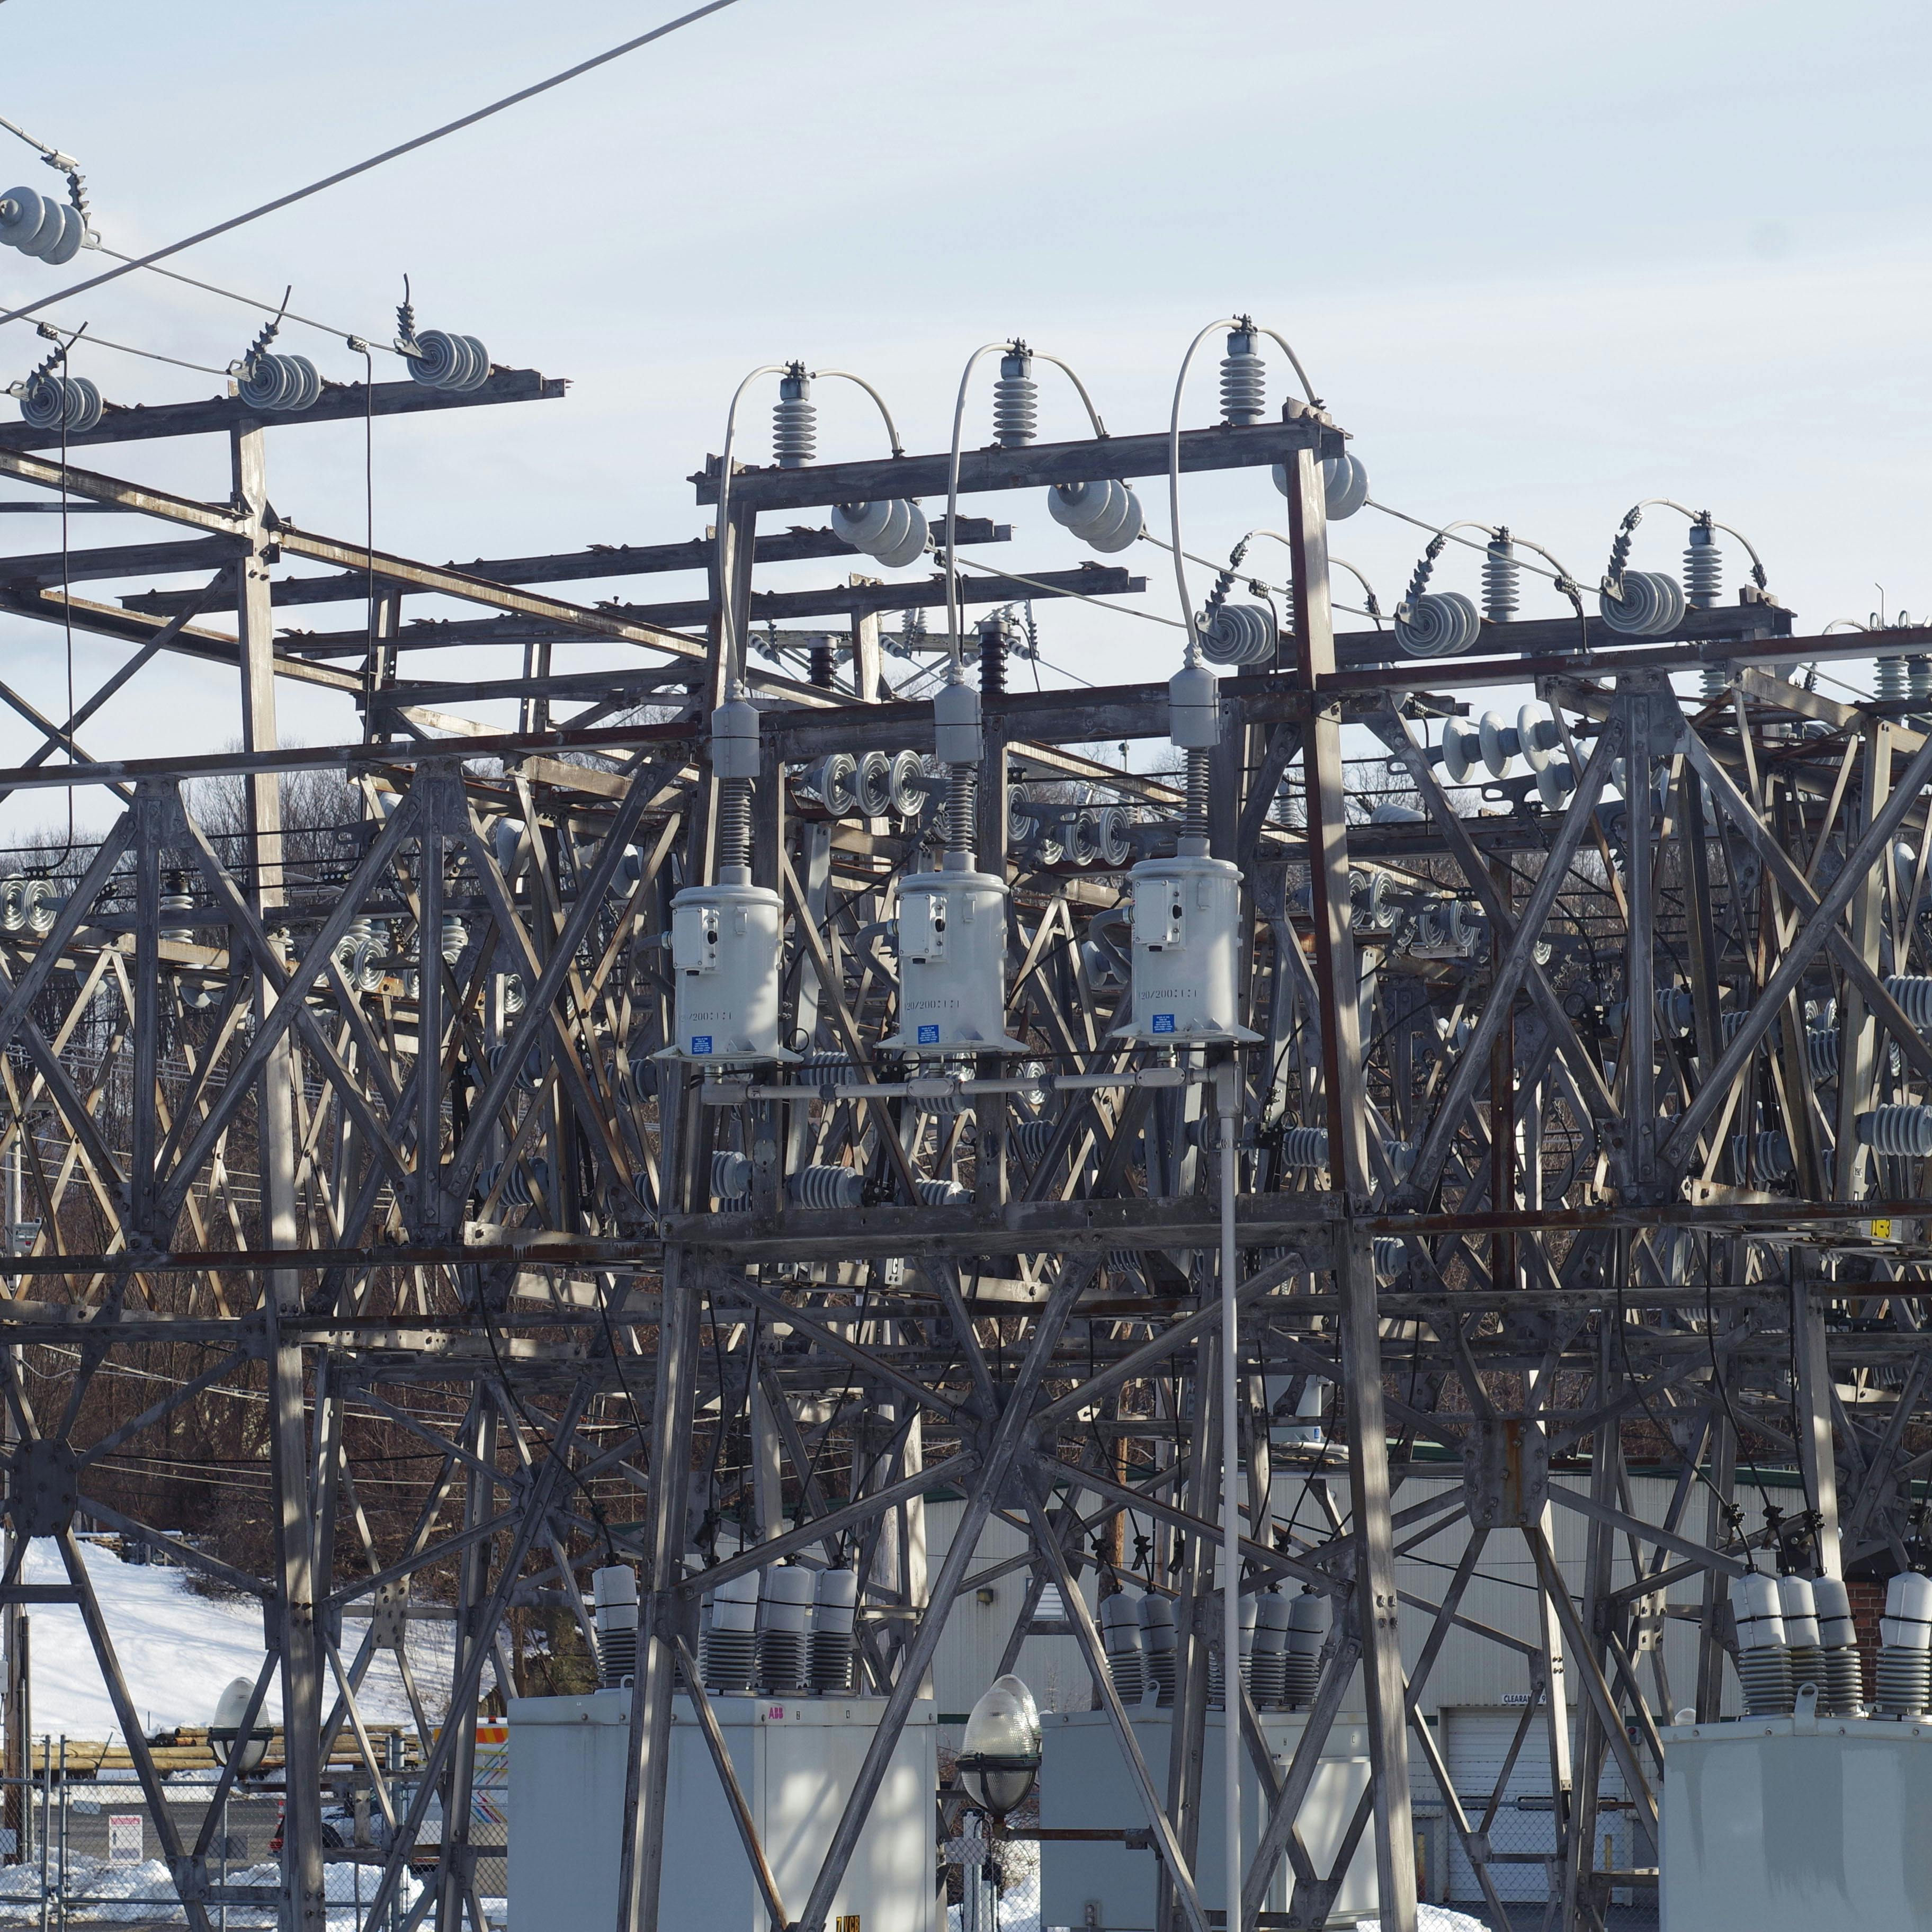 a power substation, showing a complex system of metal beams and large transformers